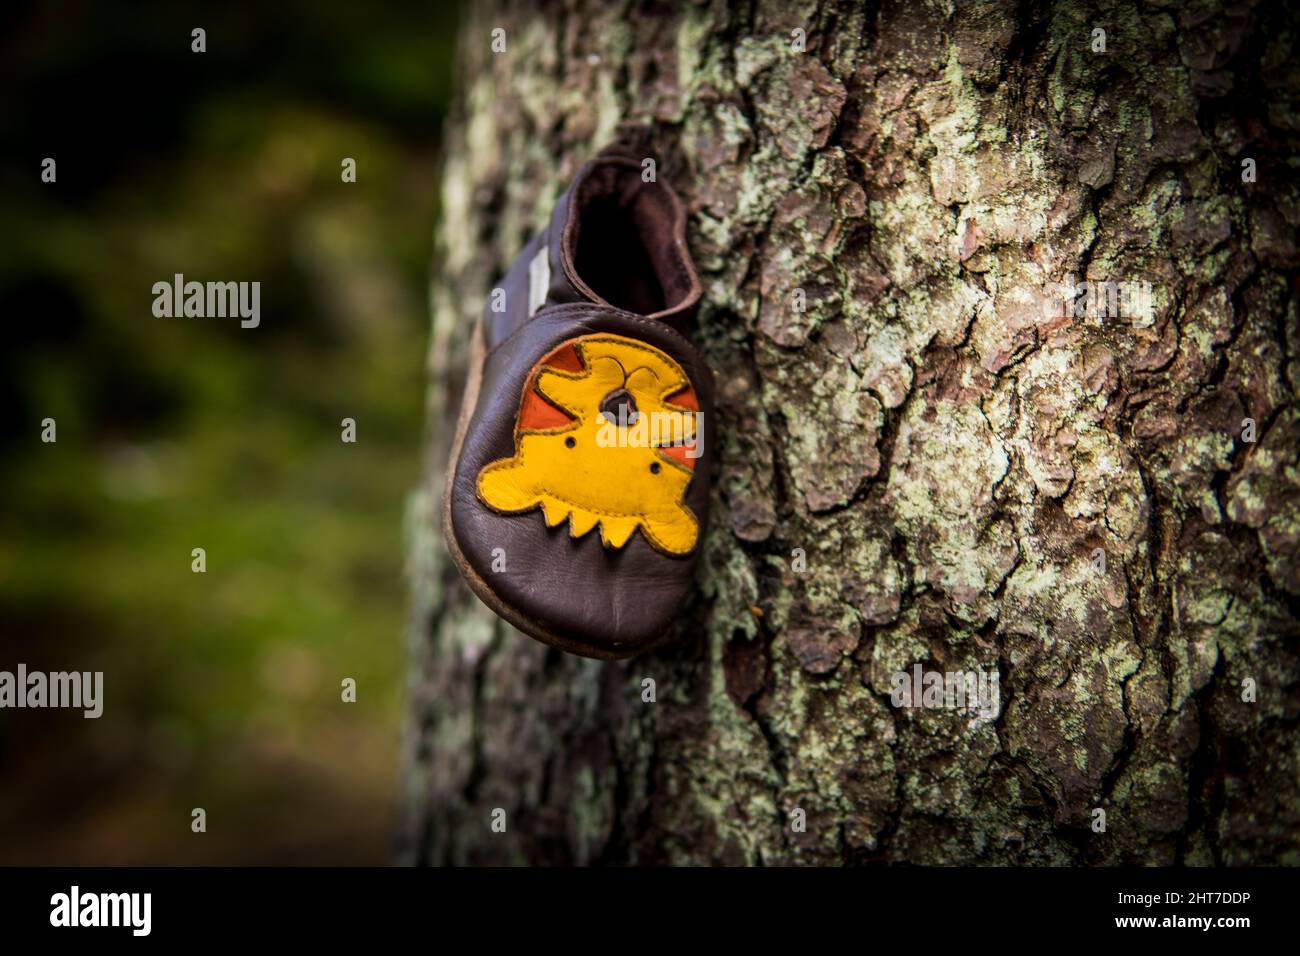 Shoe of a baby with tiger print hanging on a tree in the forest Stock Photo